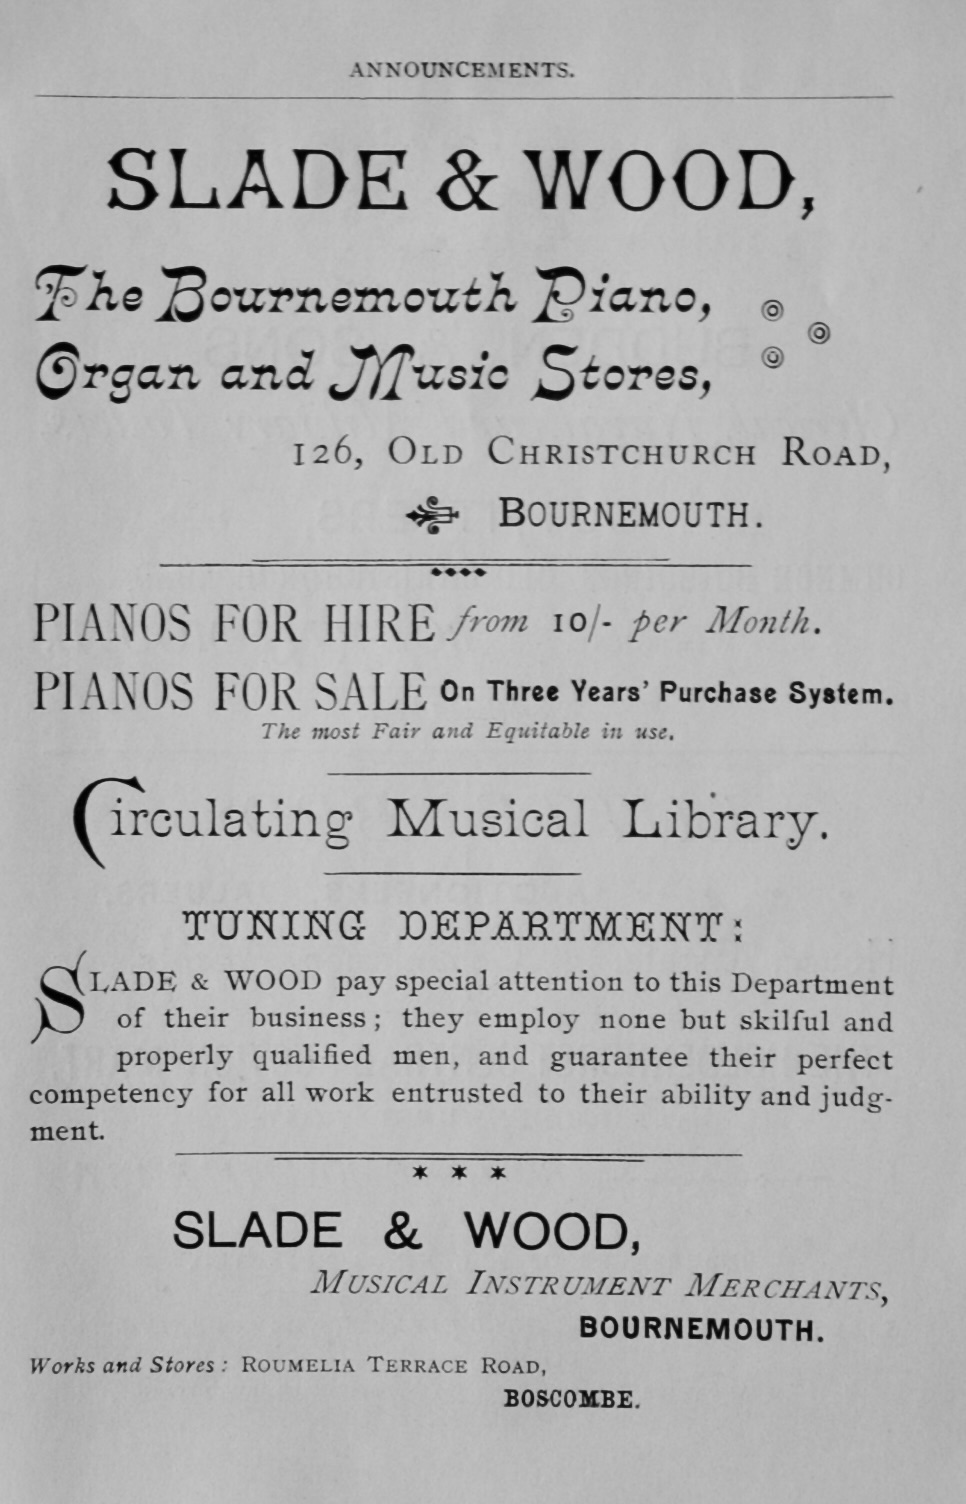 Slade & Wood., The Bournemouth Piano, Organ and Music Stores, 126, Old Chri